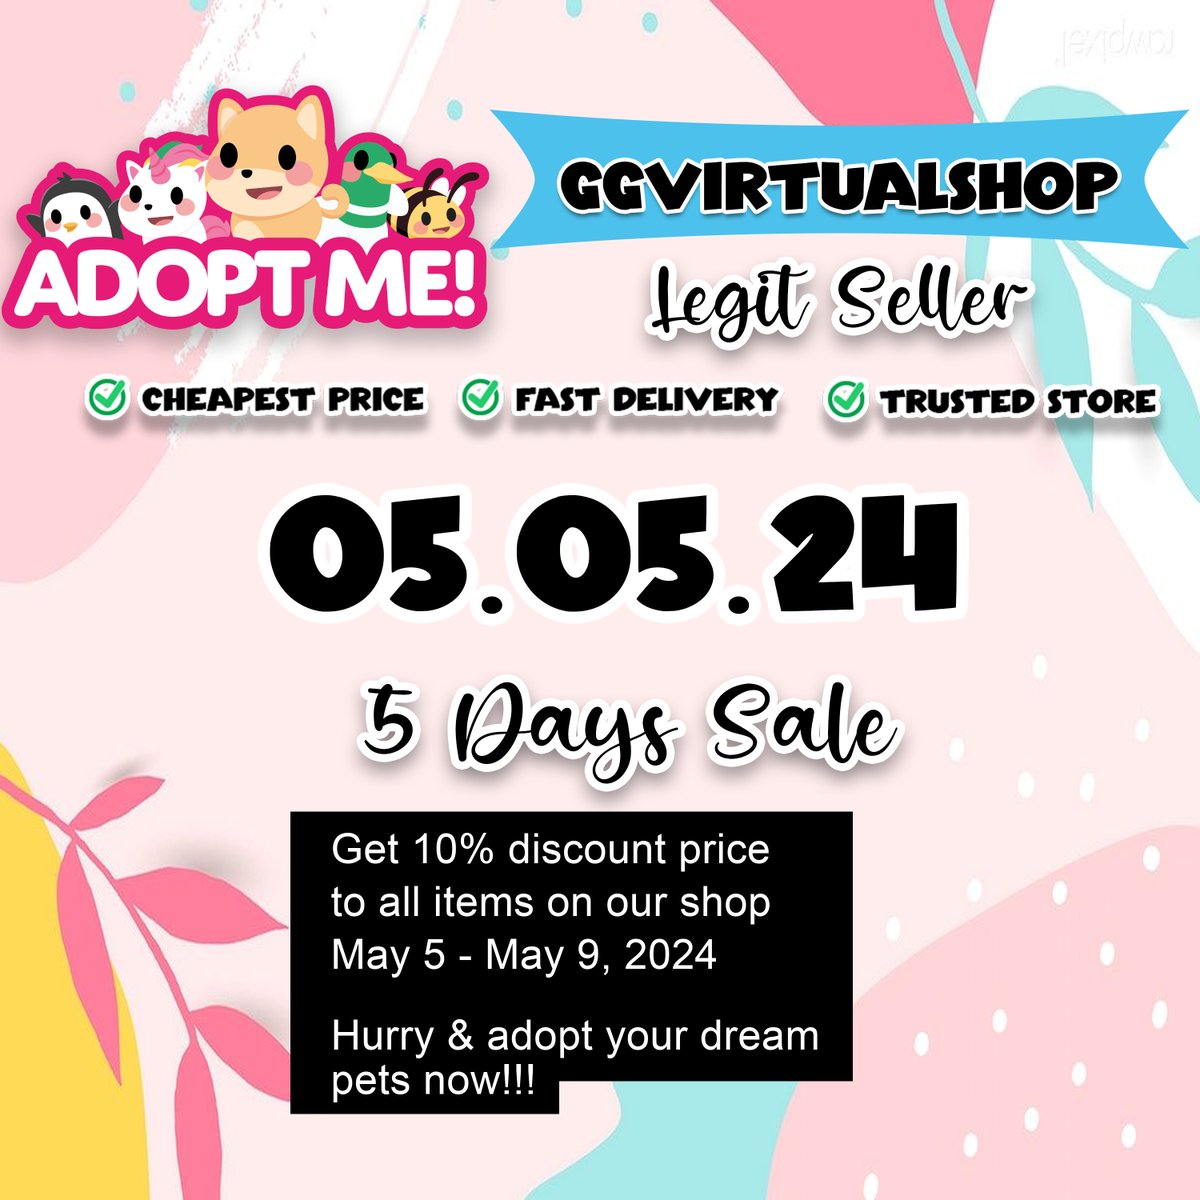 Hello guys our shop is on SALE NOW May 5 - May 9, 2024 it's a 10% discount price to all the pets in our shop. See you soon guys😇 
Adopt you dream pets now!
This is  our shop link: ggvirtualshop.etsy.com

#Adoptme #AdoptMePets #AdoptmeRoblox #adoptmeoffers #ggvirtualshop